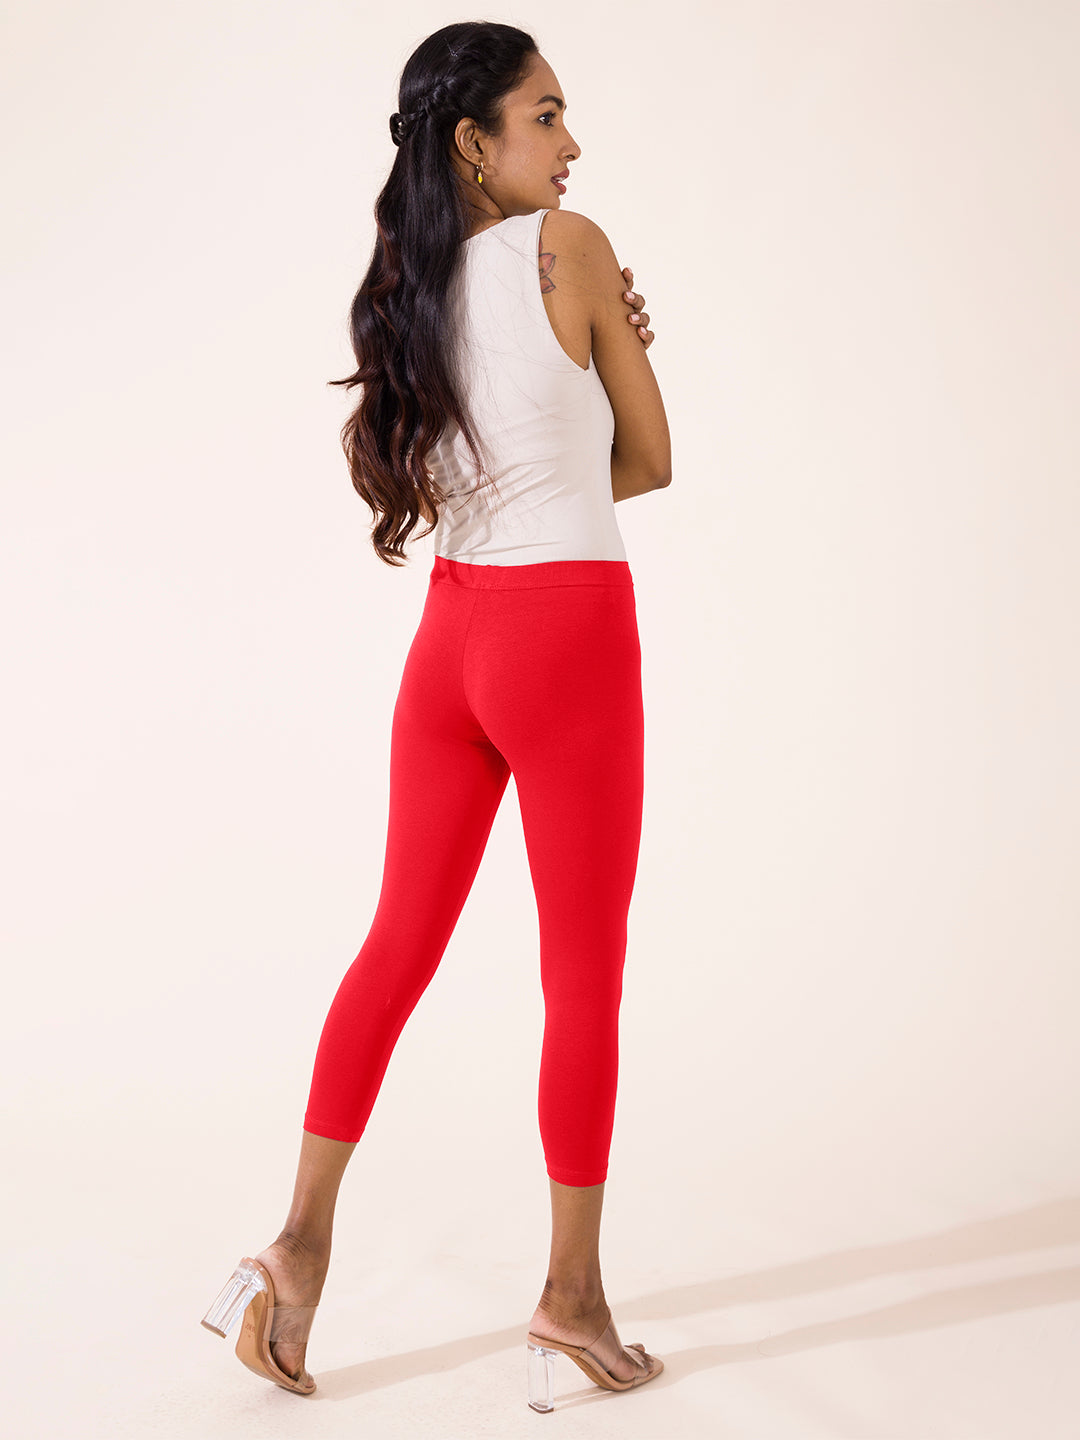 GO COLORS Women's Stretch Fit Cotton Leggings (LL_BabyPink2_M_Baby Pink_M)  : Amazon.in: Fashion